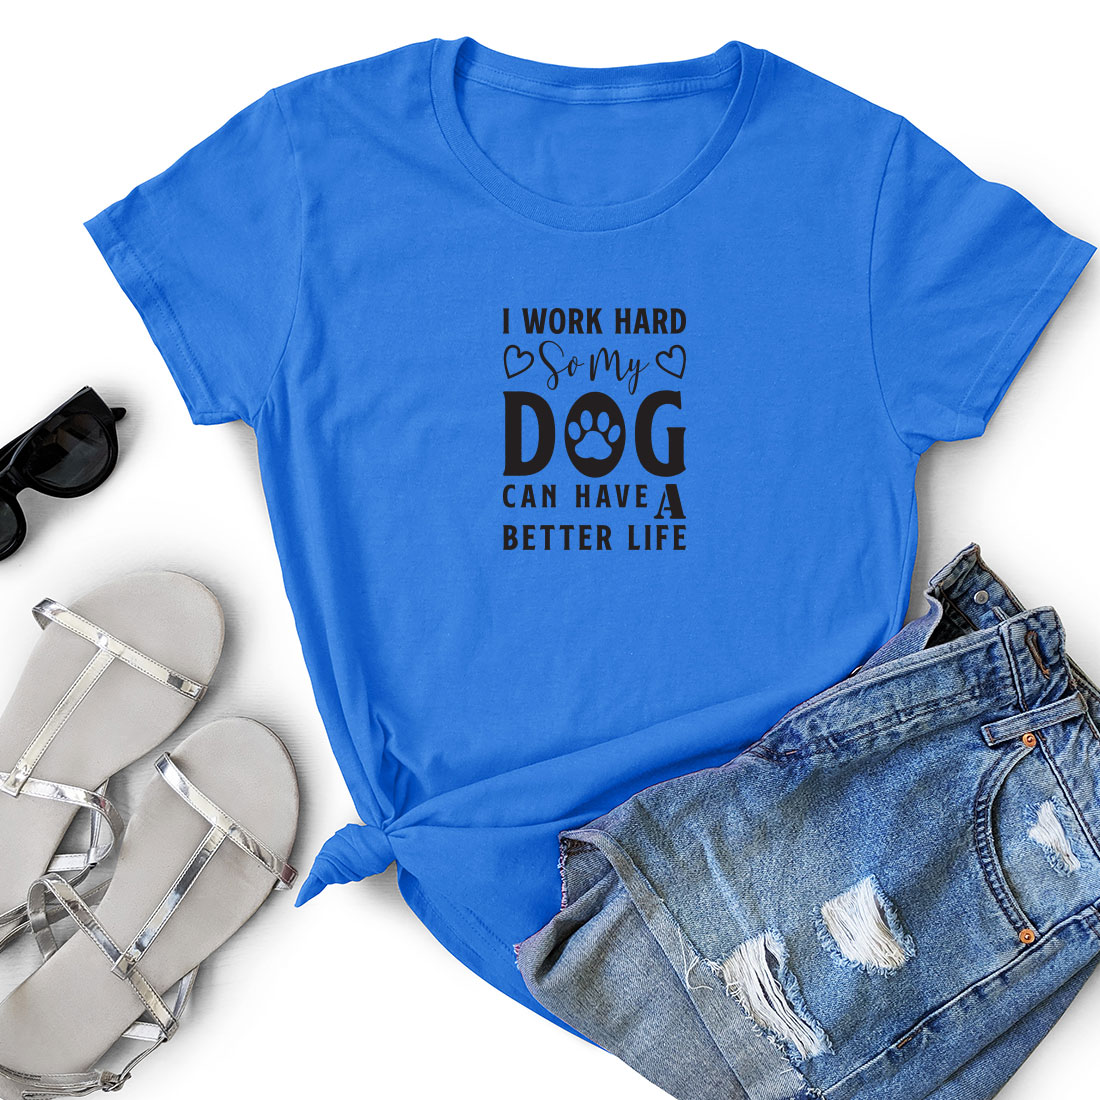 T - shirt that says work hard every dog can have a better life.